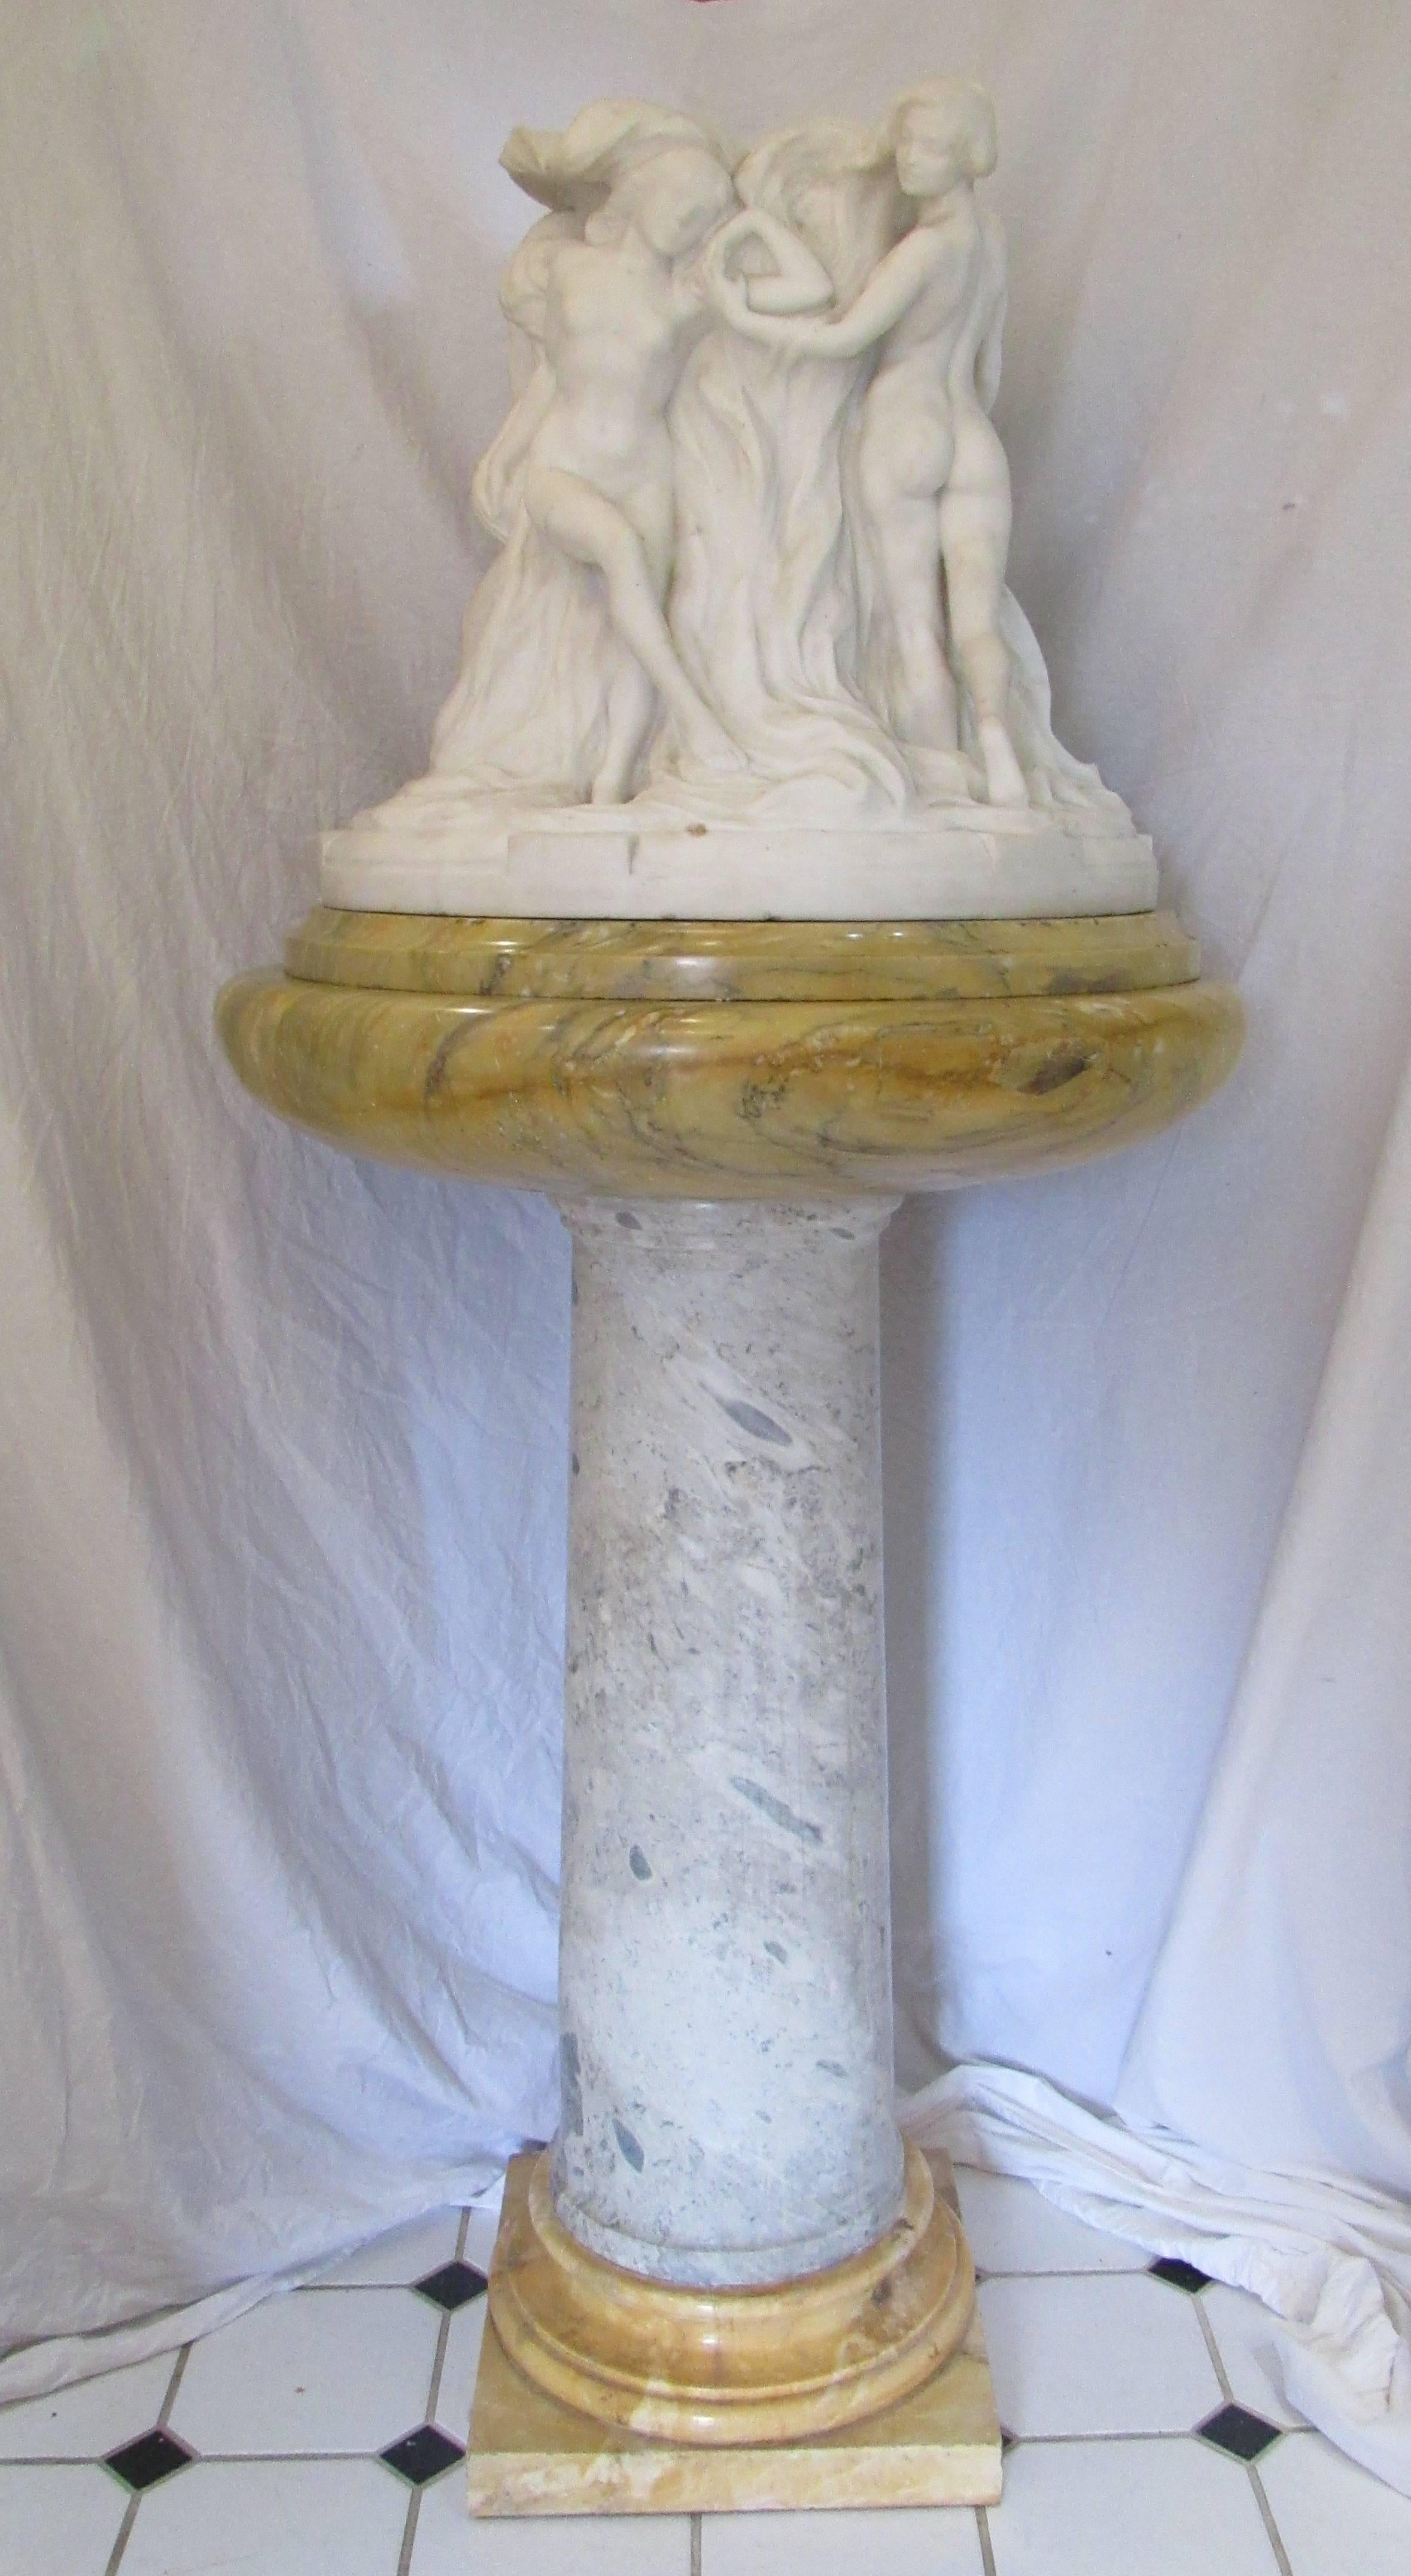 Beautiful Art Deco Italian marble carving of dancing nymphs on pedestal. Hollow vase interior with five dancing nudes surrounding. 30